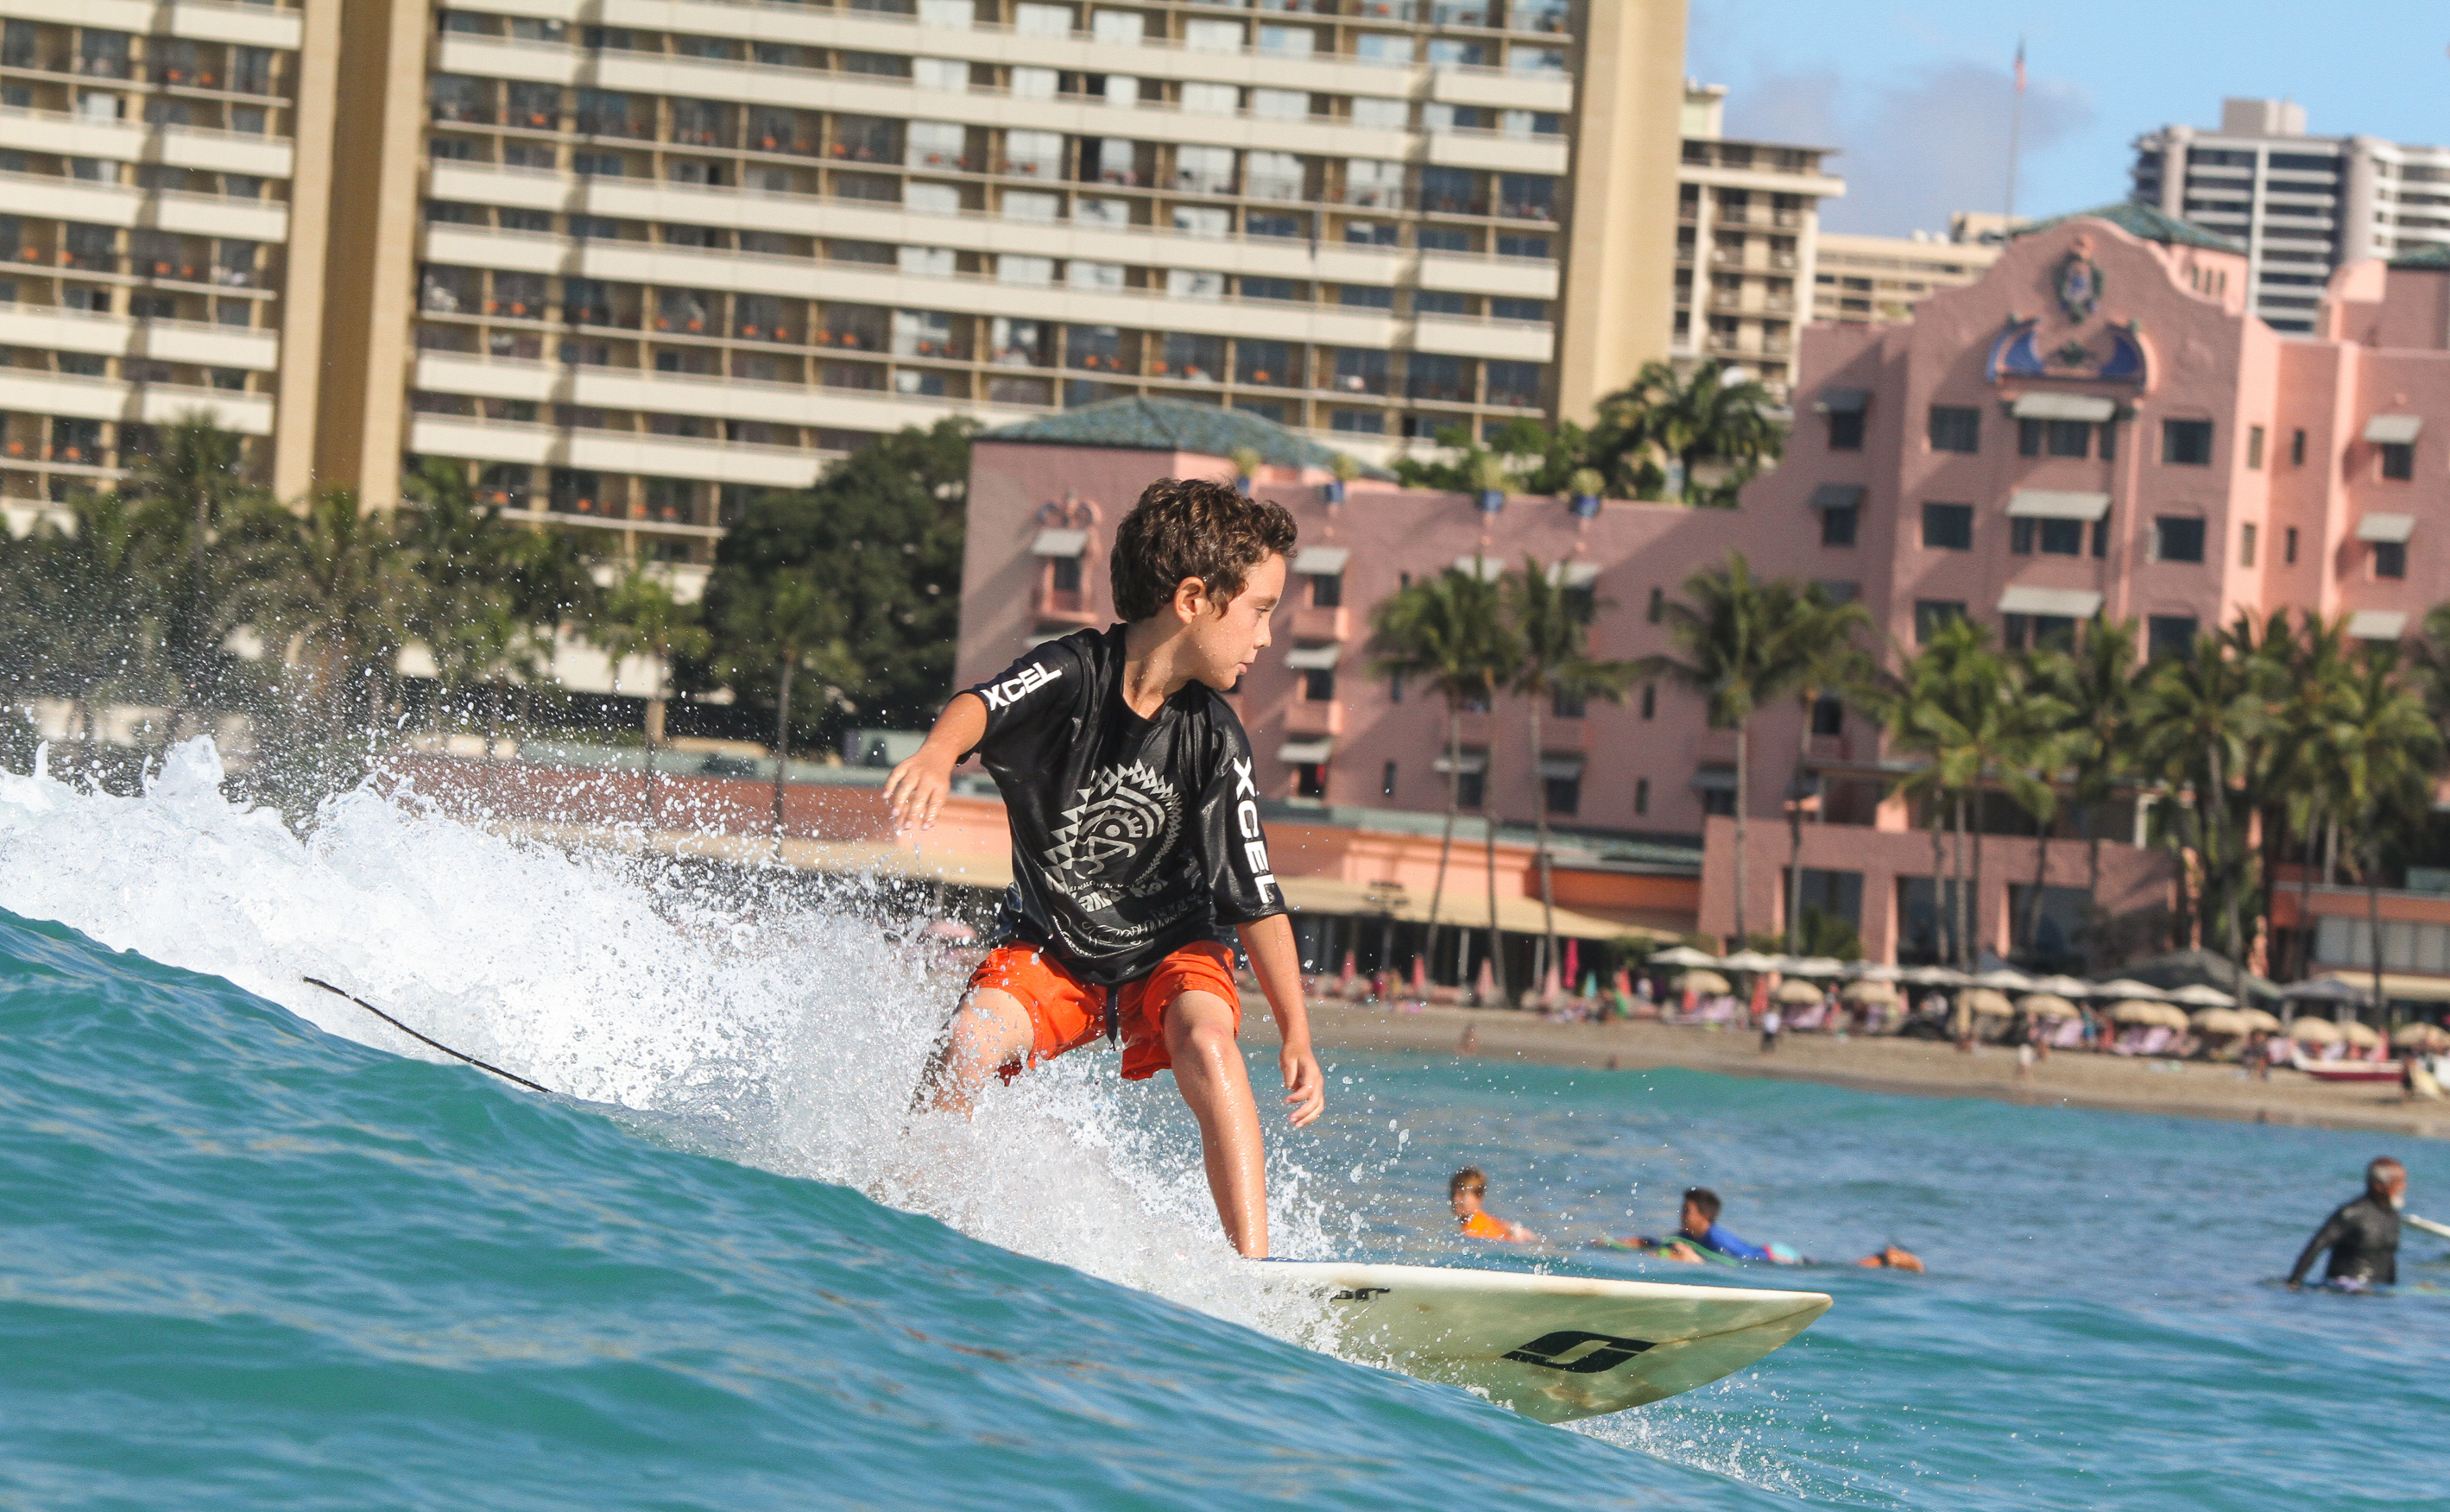 Keiki (child) athletes can show off sweet moves along Waikiki Beach during Duke's OceanFest Matson Menehune Surf Fest. This special pro-style surf competition encourages surfing among Hawaii's youth.